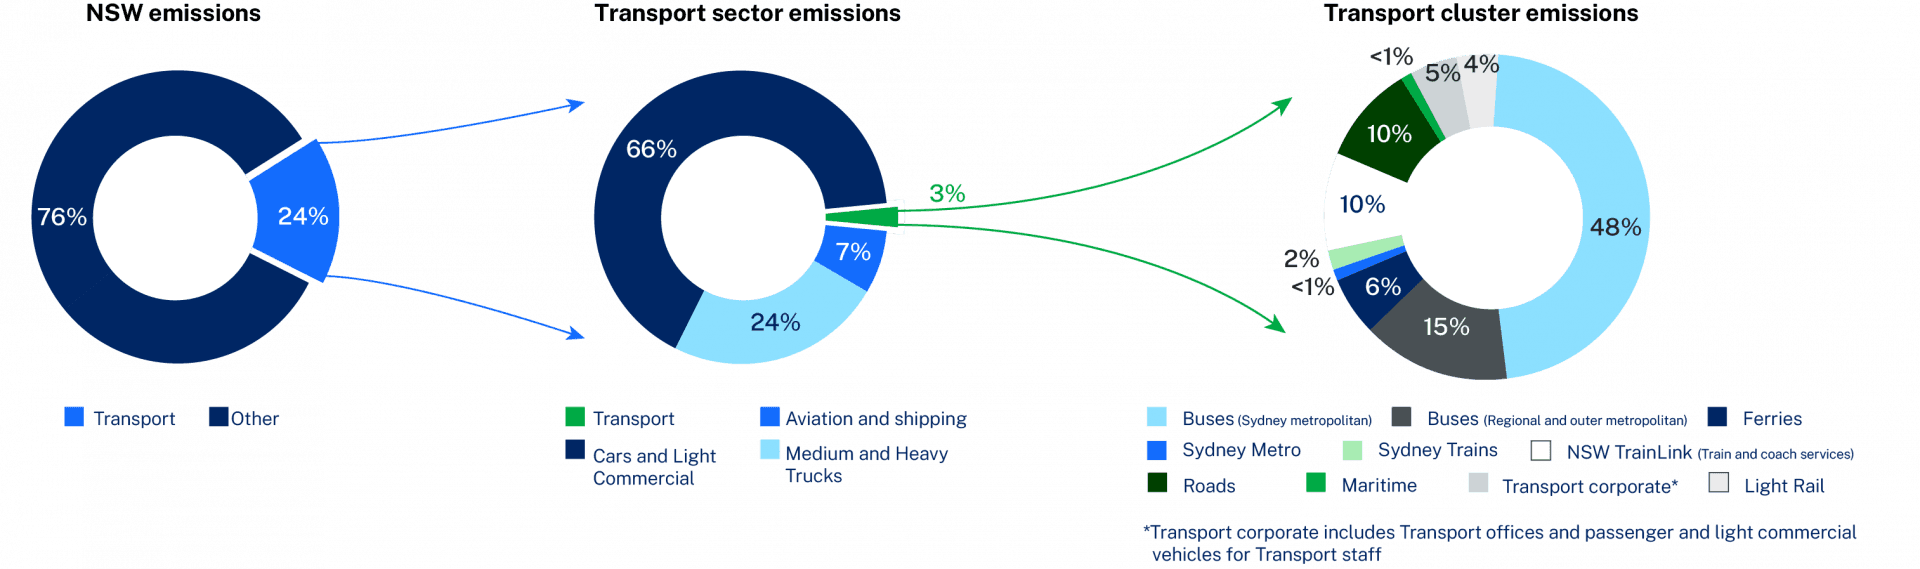 Pie charts depicting the distribution of contributions to Green House Gas (GHG) emissions throughout Transport's network.